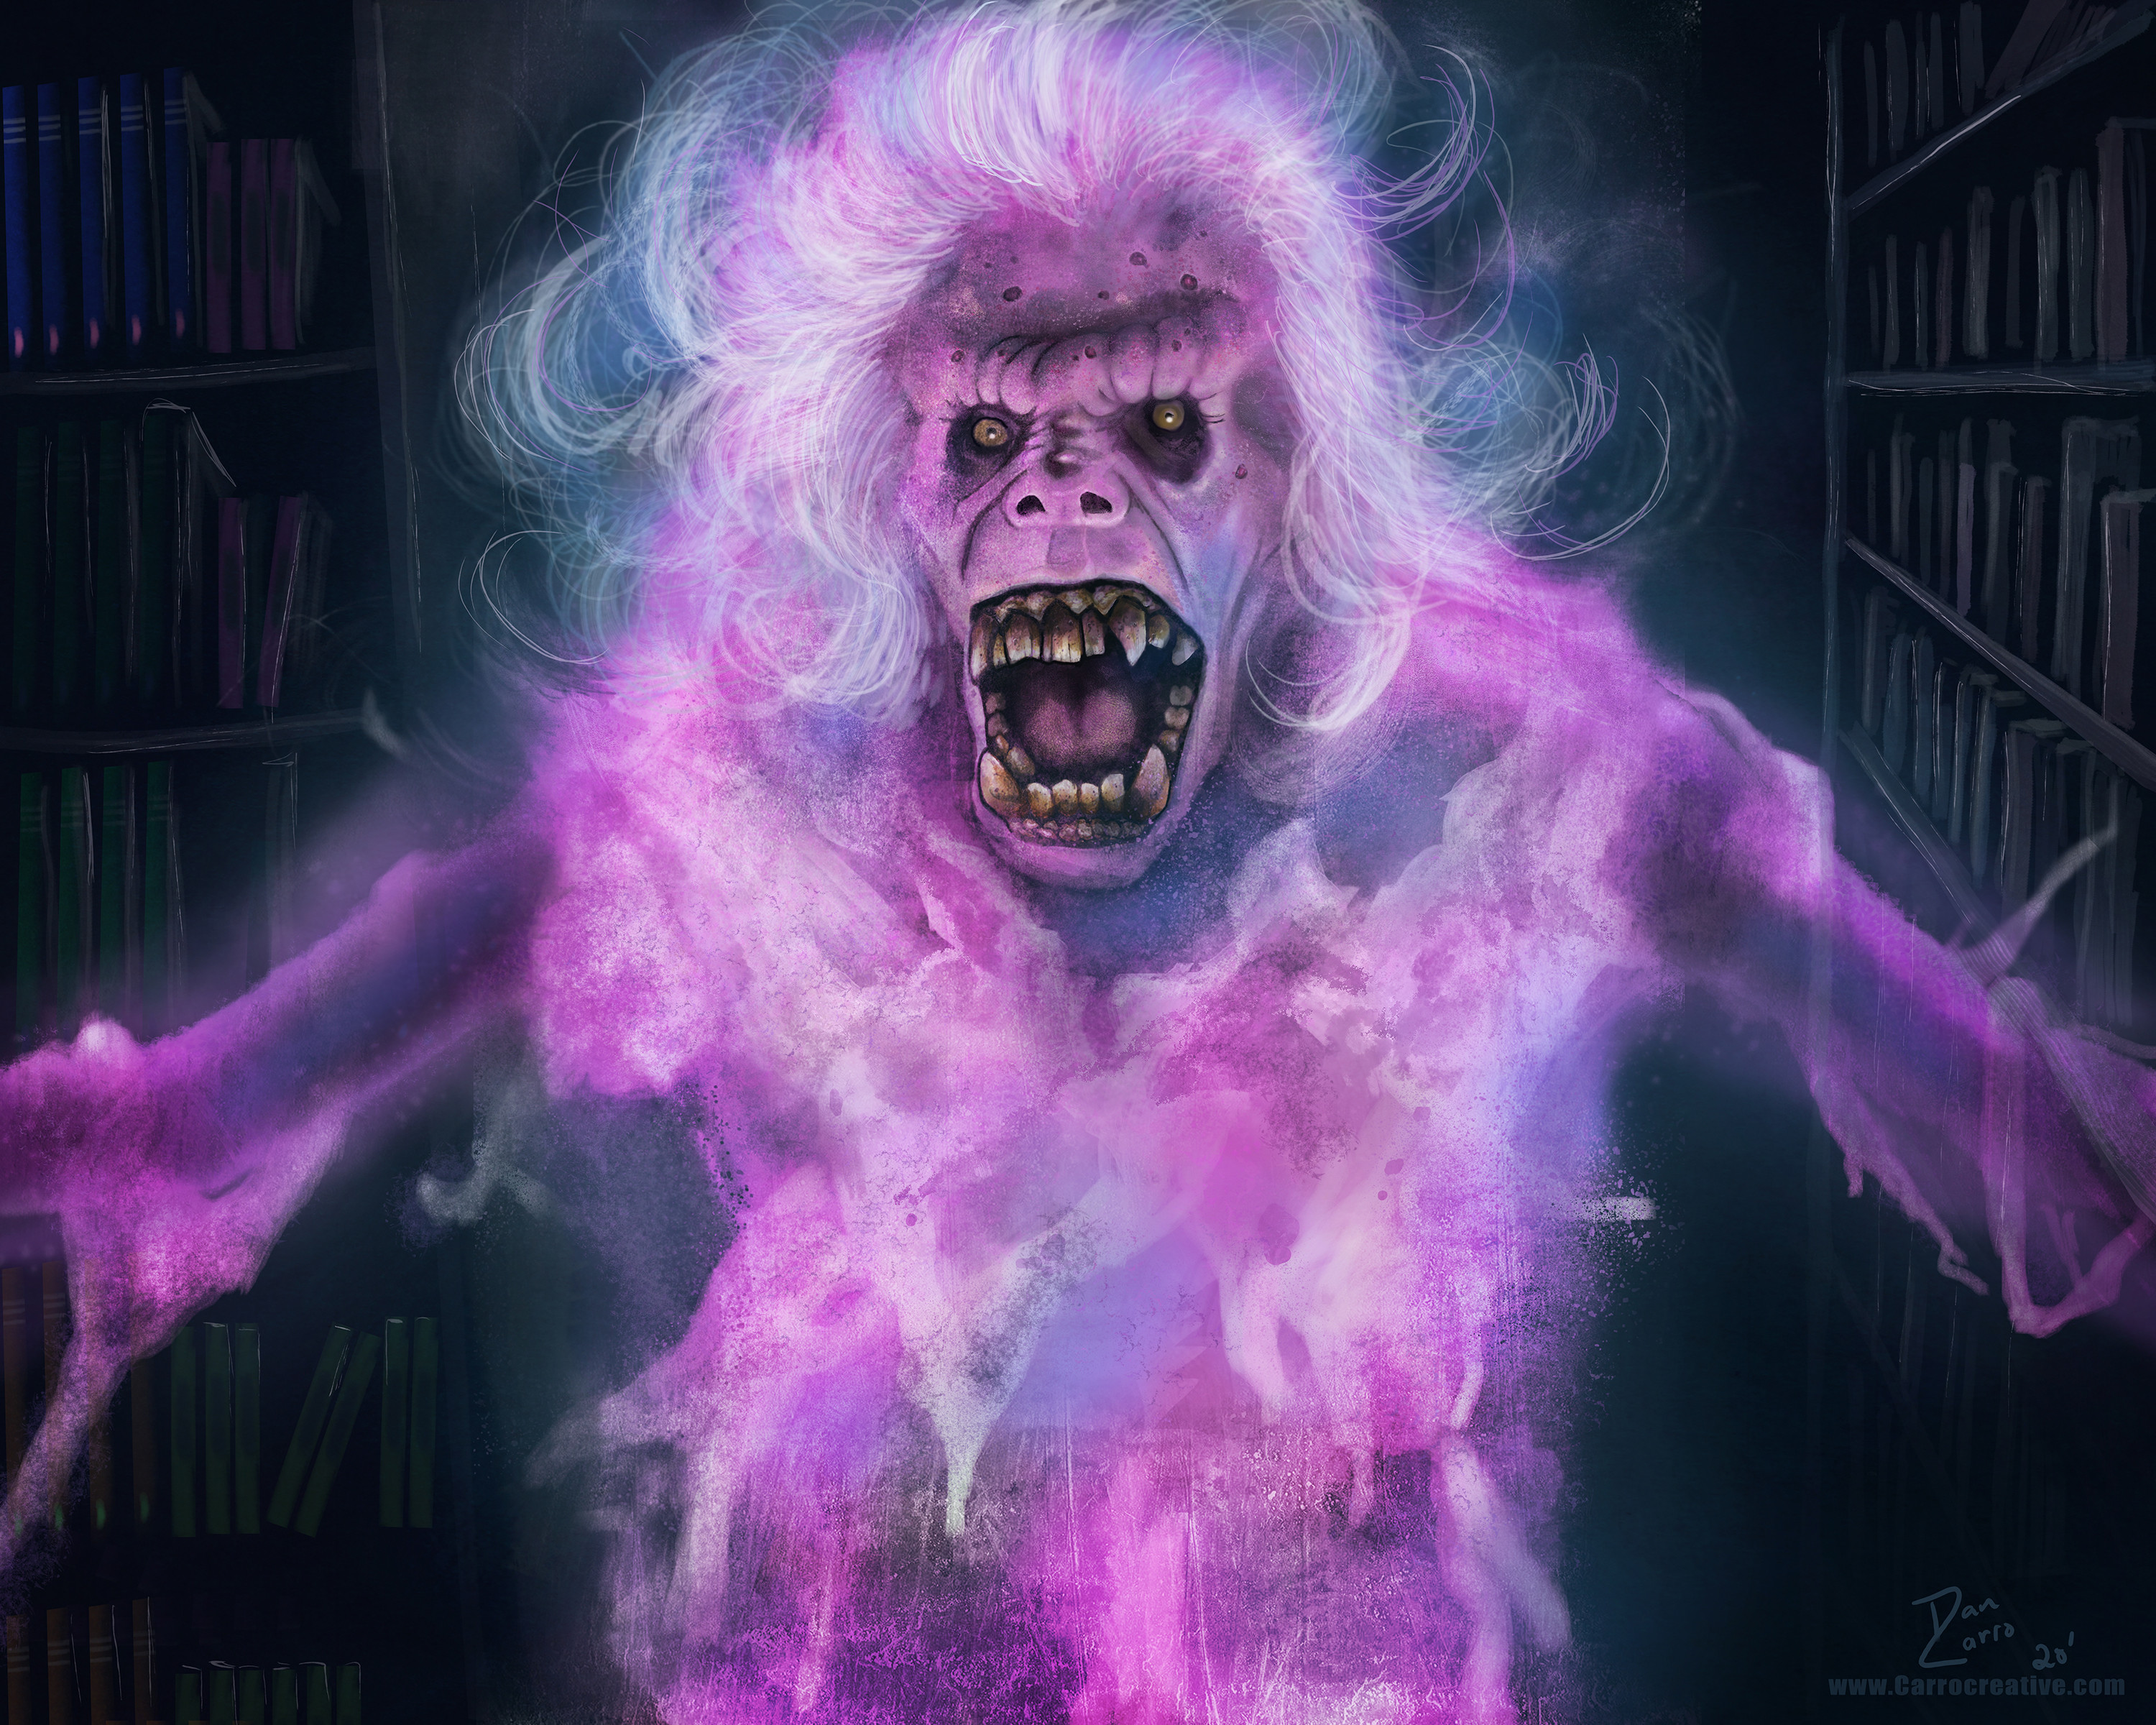 ghostbusters library ghost